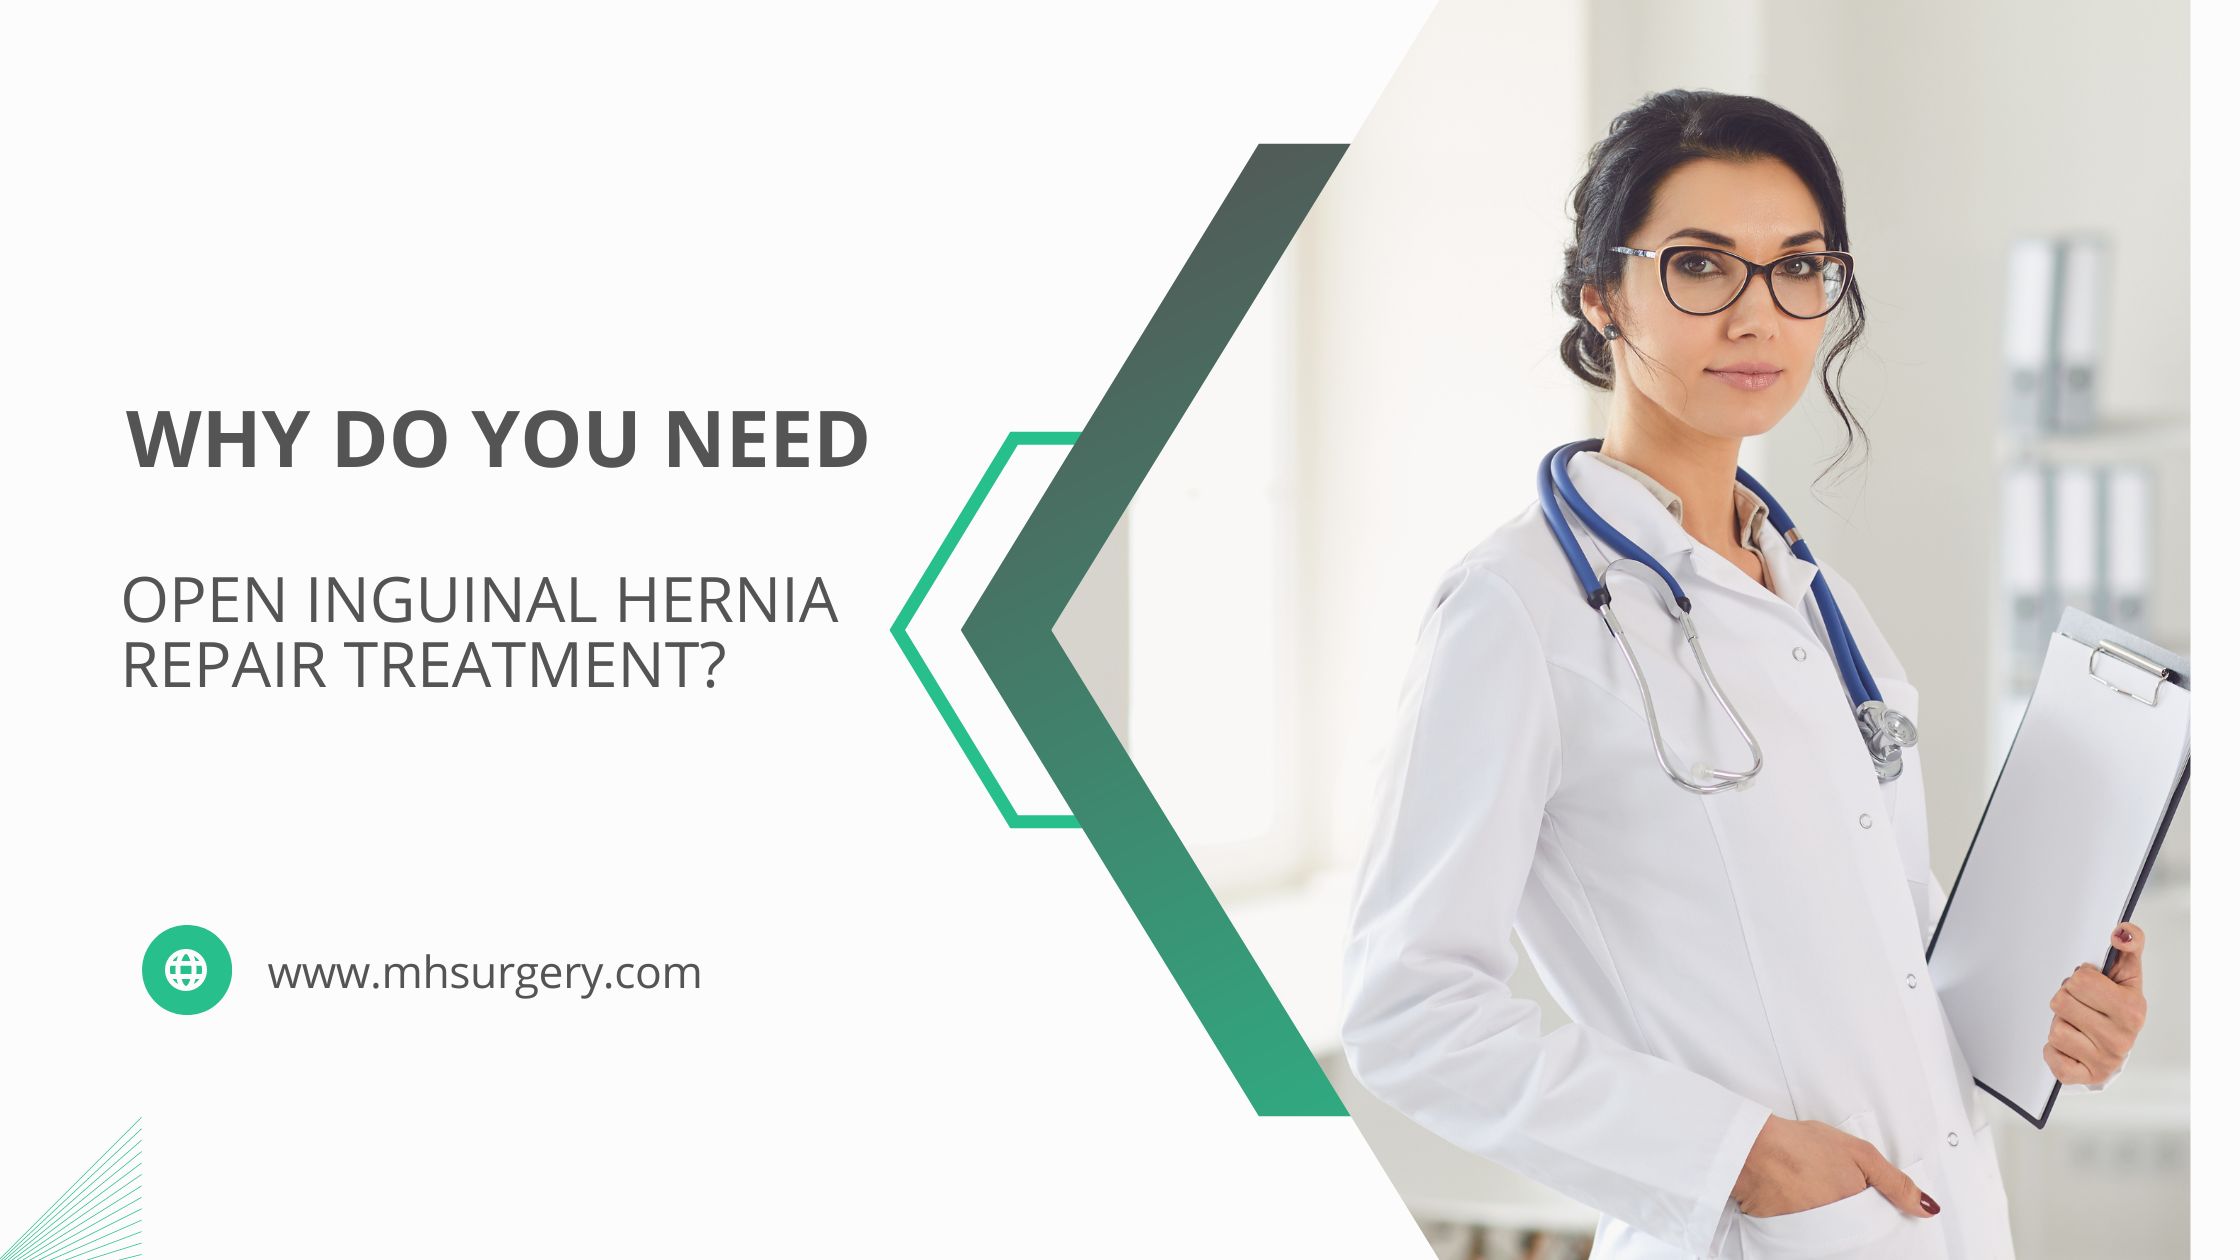 WHY DO YOU NEED OPEN INGUINAL HERNIA REPAIR TREATMENT?